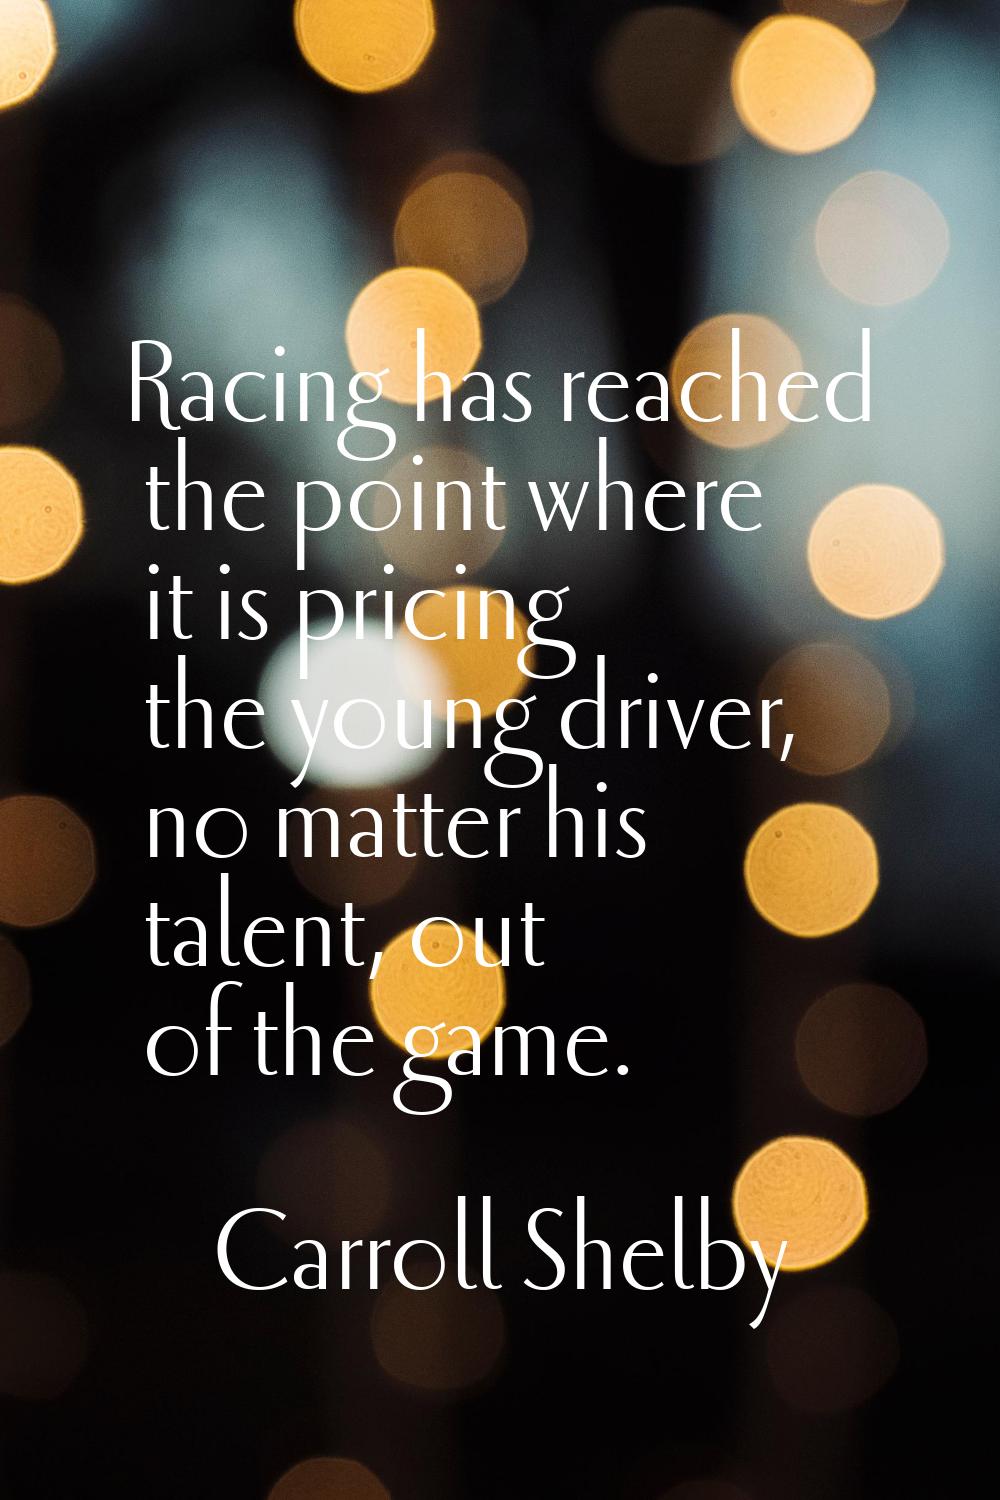 Racing has reached the point where it is pricing the young driver, no matter his talent, out of the